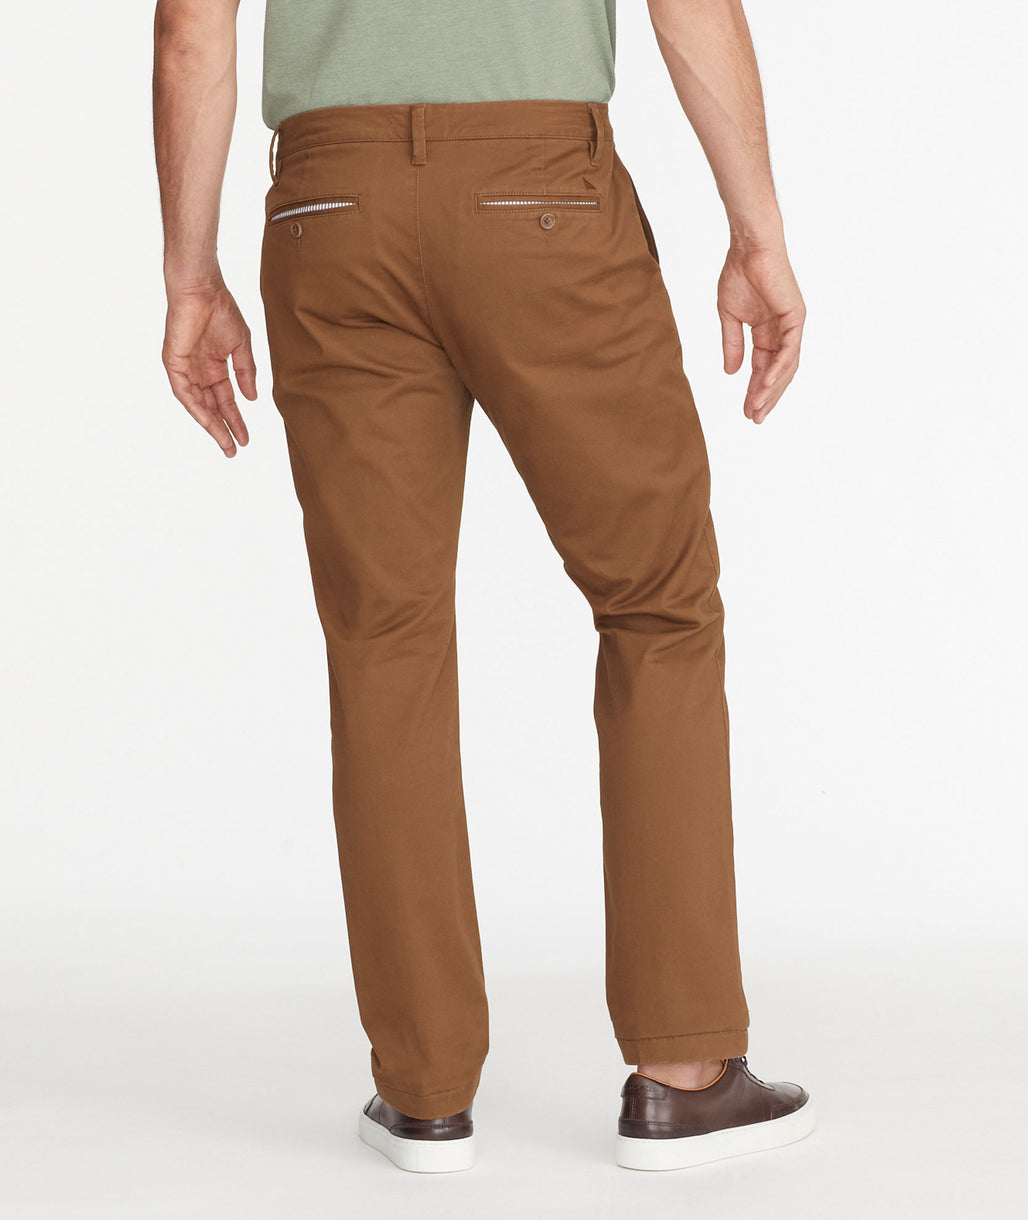 Designer Chino Pants For Men | Shop Chinos For Men| Polo